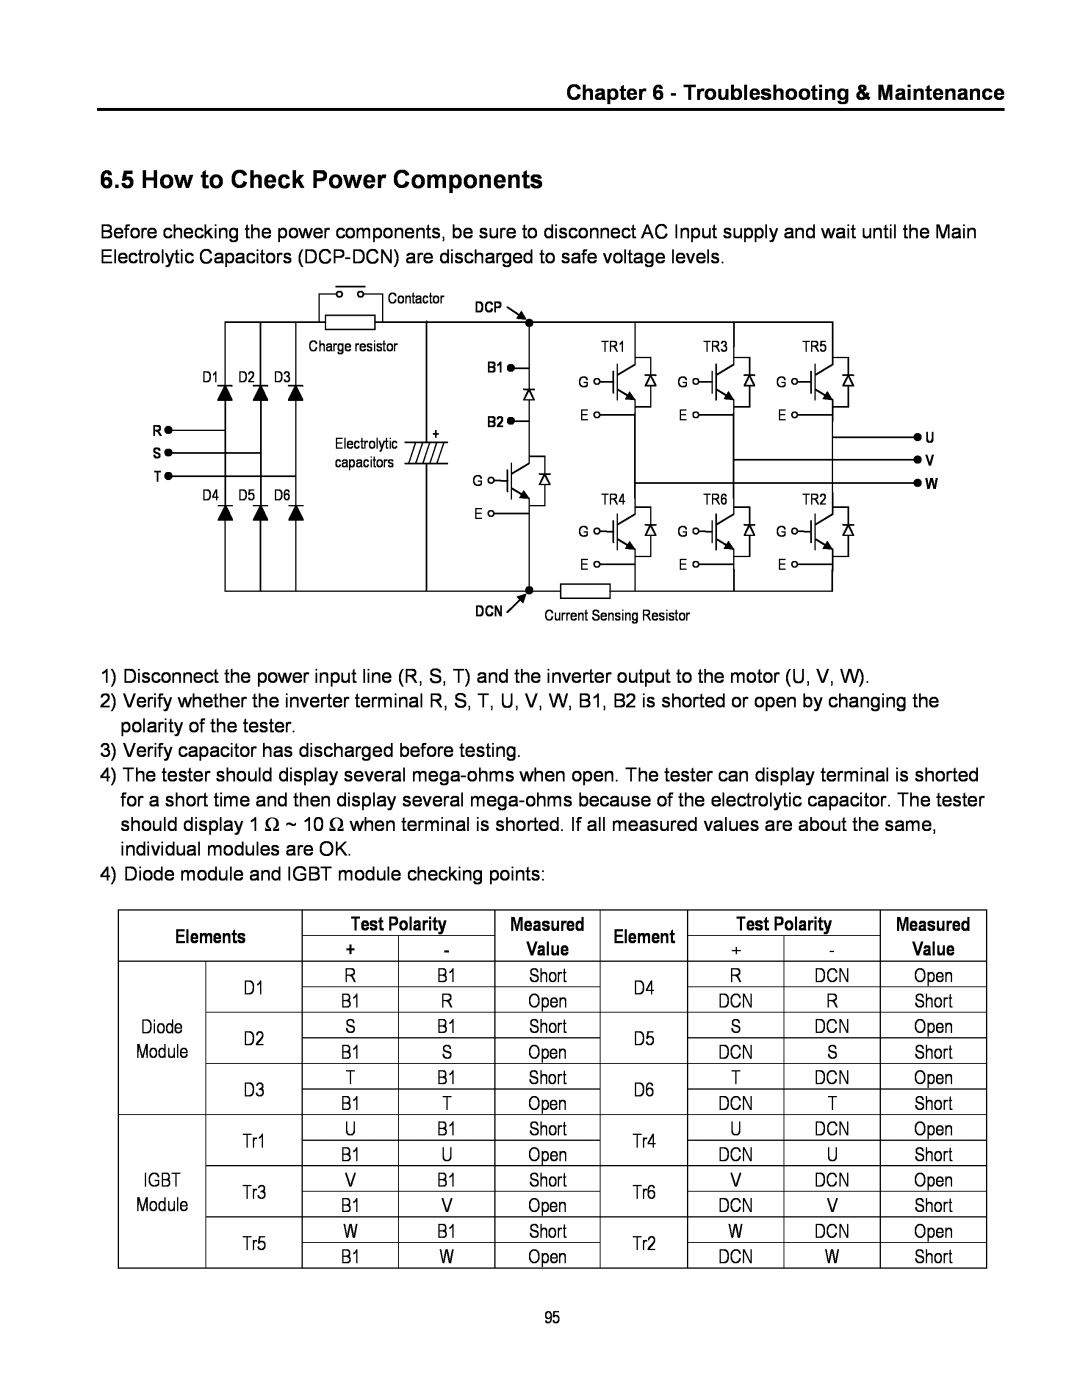 Cleveland Range inverter How to Check Power Components, Troubleshooting & Maintenance, Elements, Test Polarity, Value 